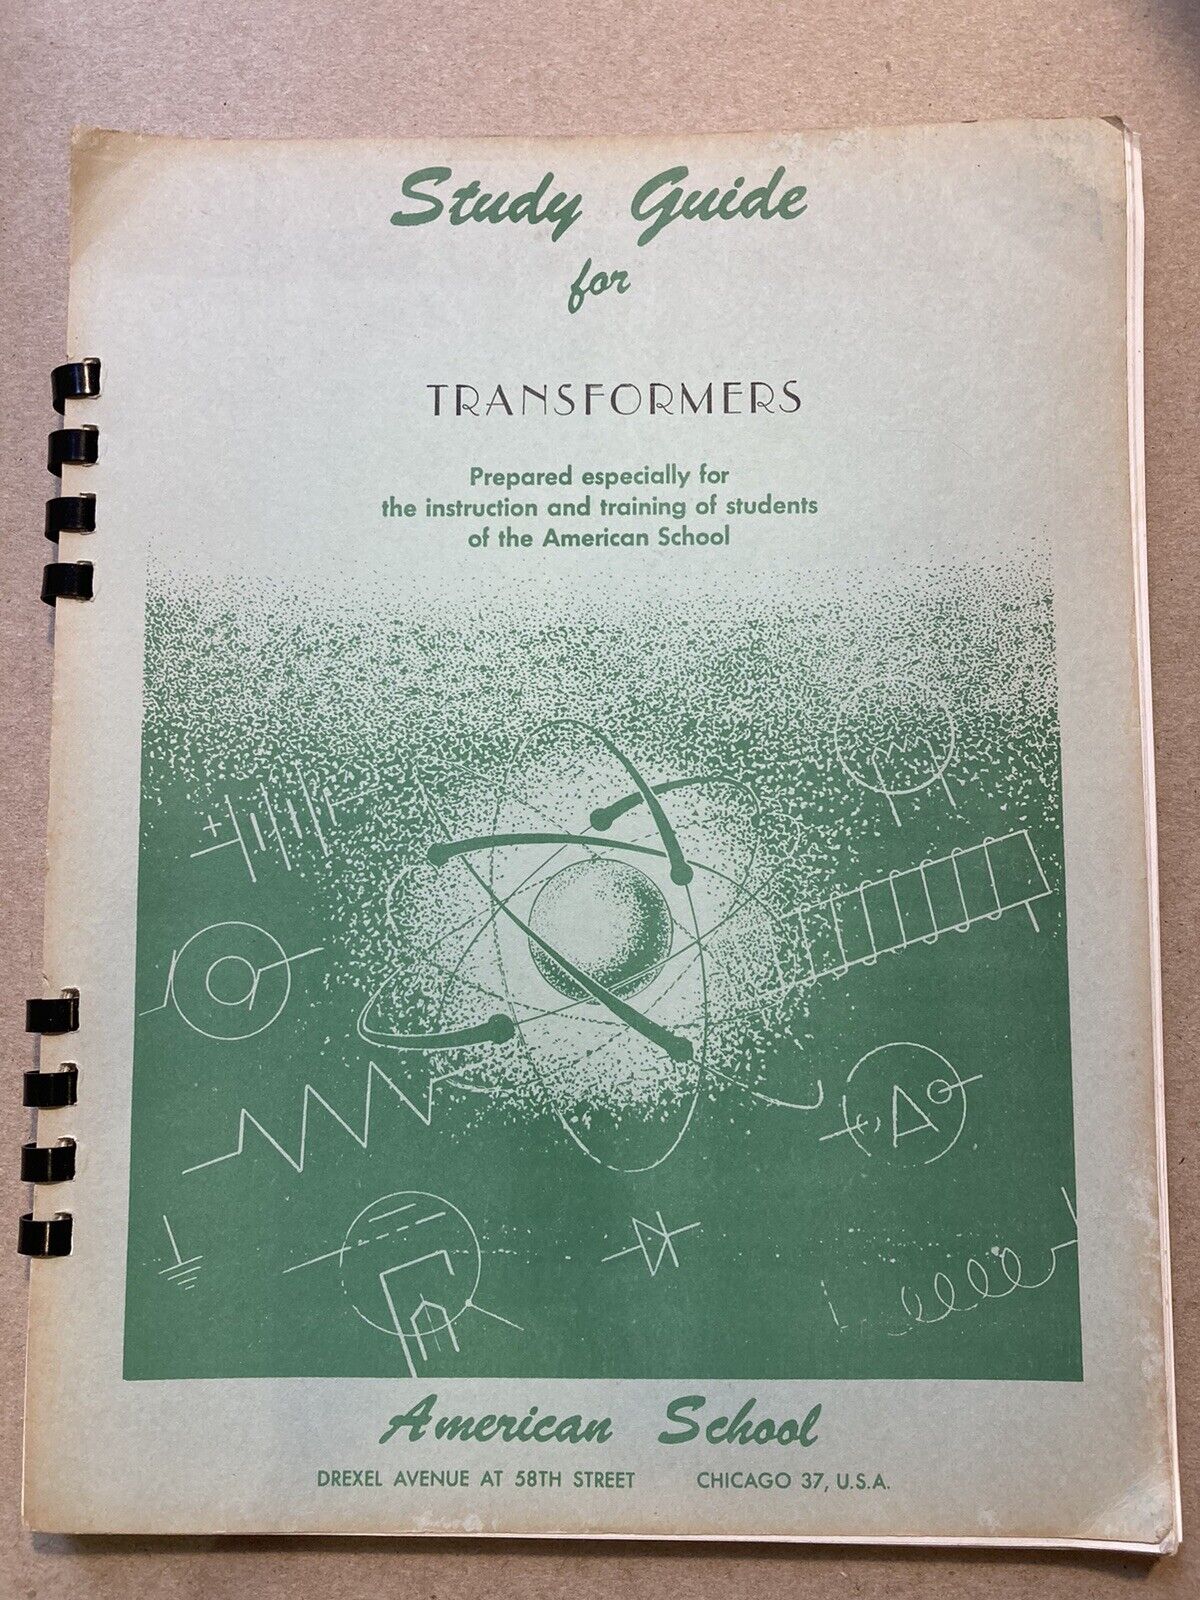 STUDY GUIDE FOR TRANSFORMERS - 1964  - AMERICAN SCHOOL -  CHICAGO - ELECTRONICS